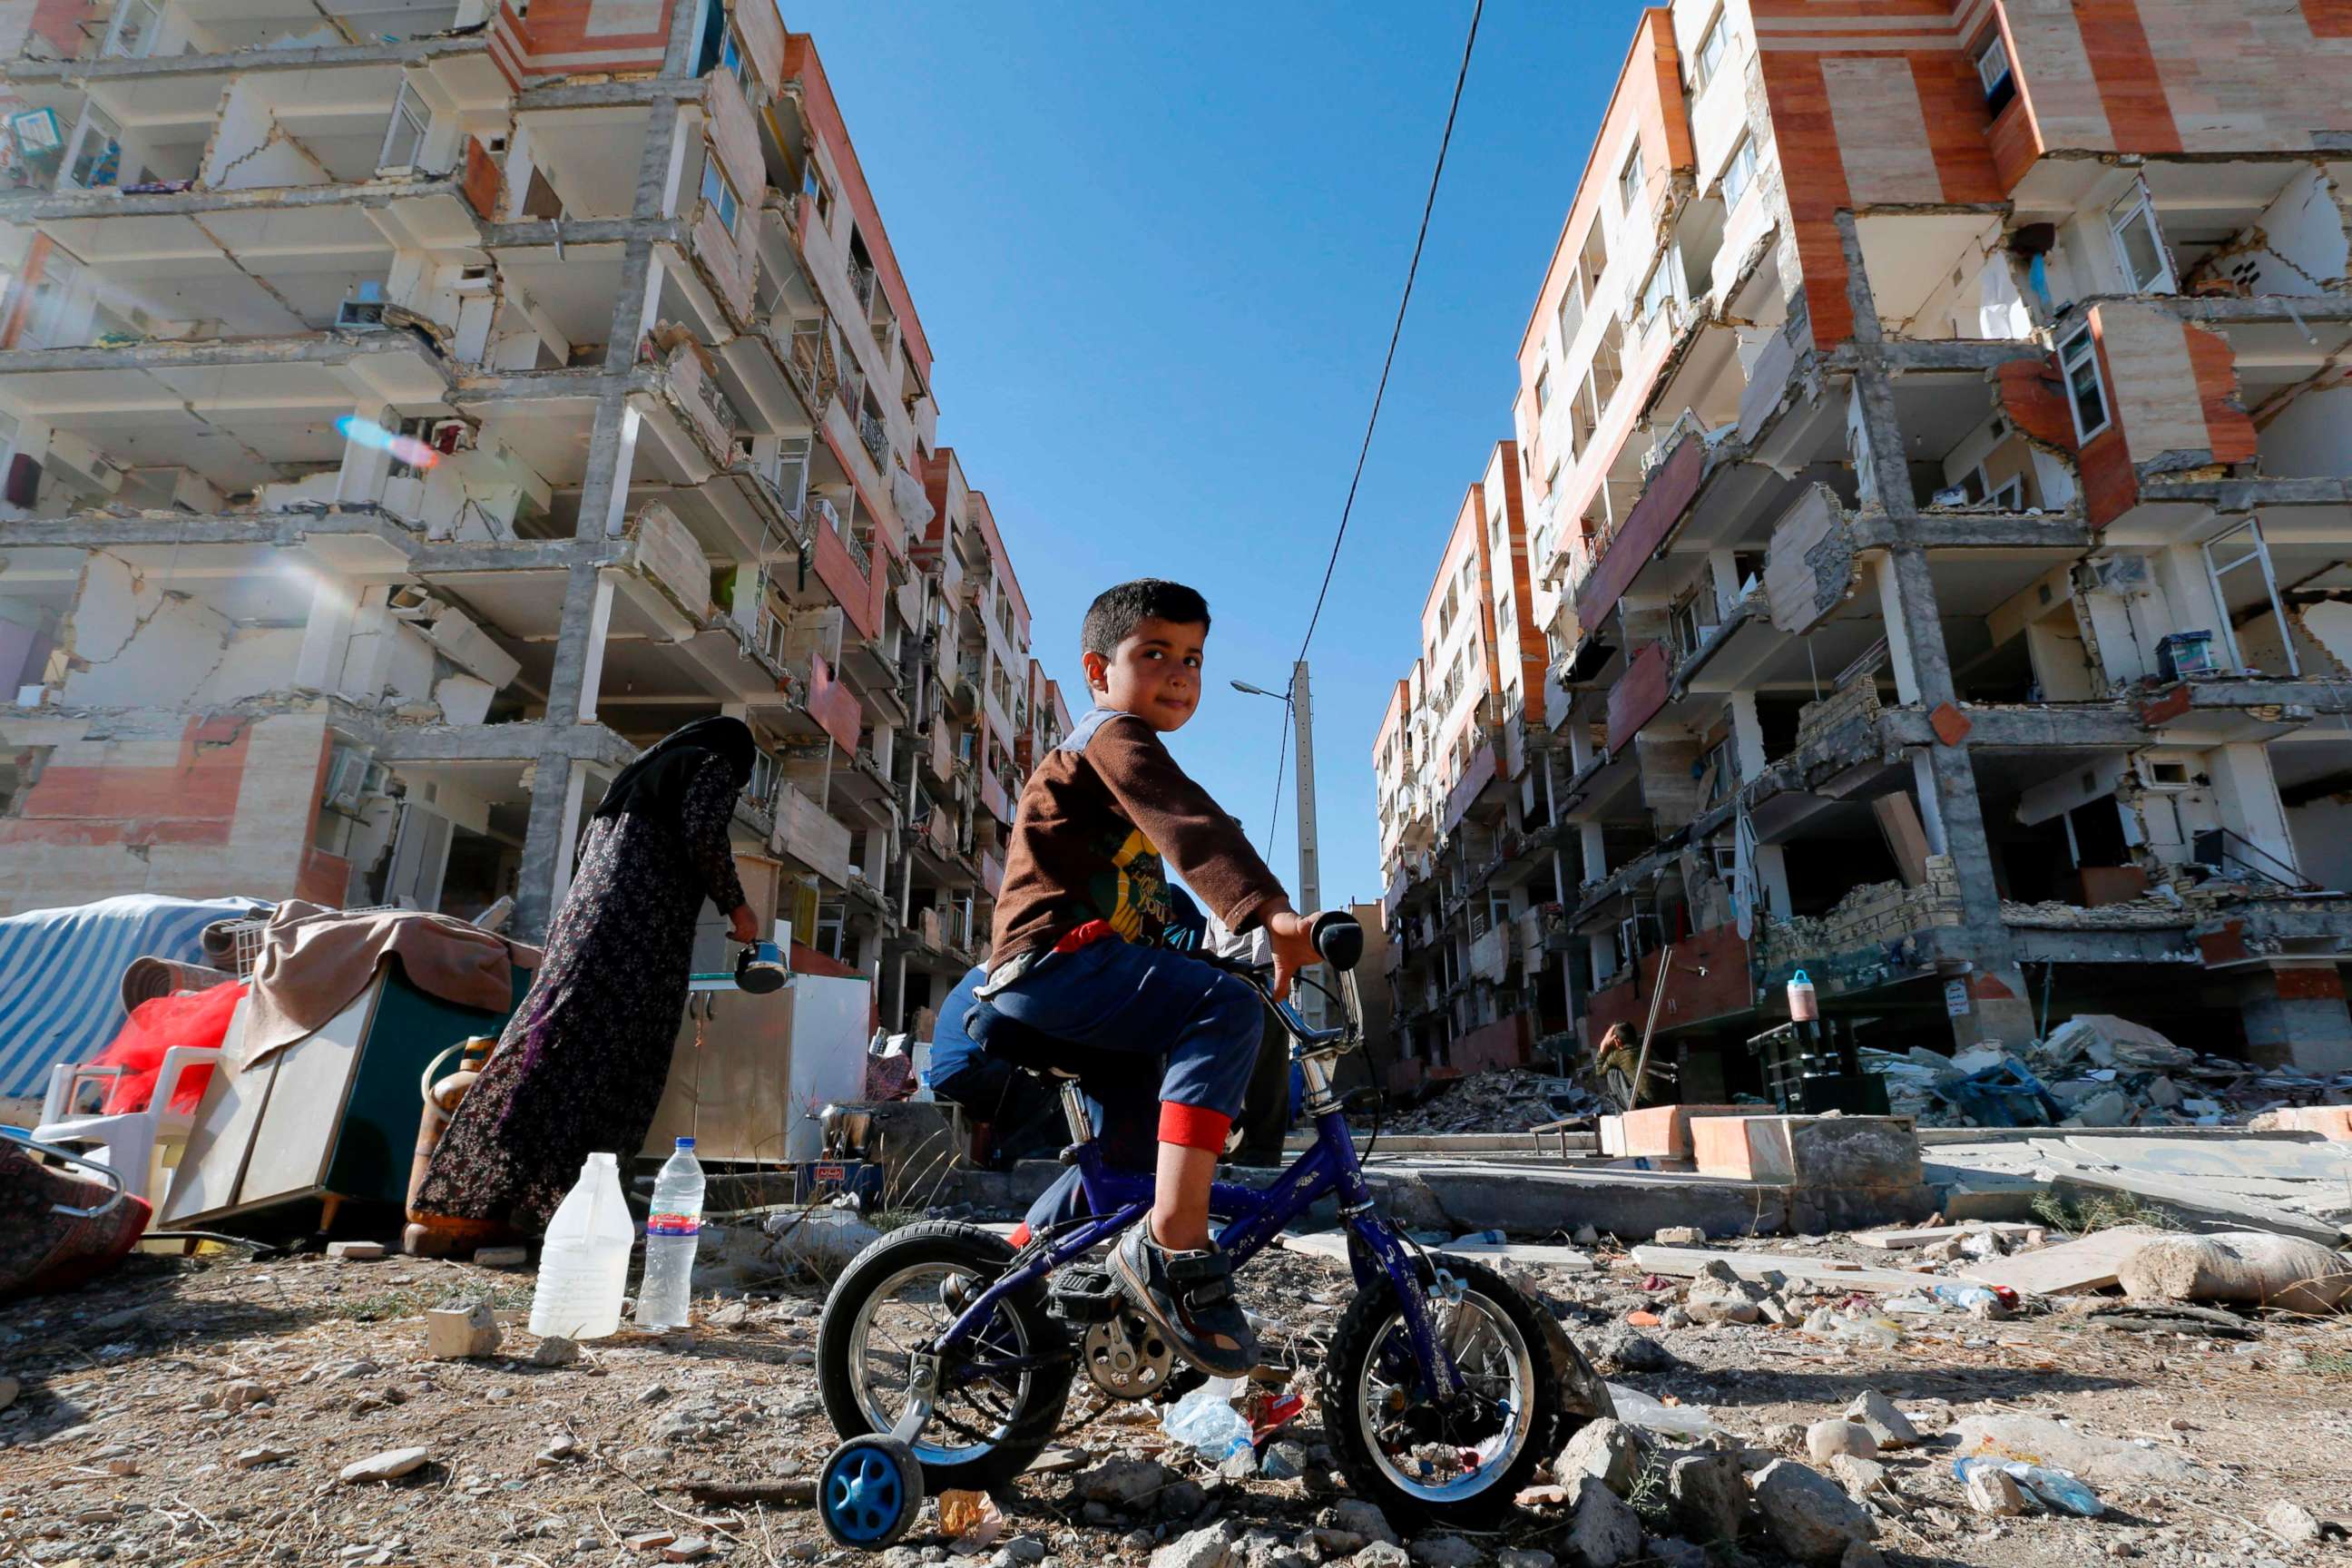 PHOTO: A boy rides a bicycle past earthquake damaged buildings in the town of Sarpol-e Zahab in Iran's western Kermanshah province near the border with Iraq, Nov. 14, 2017. A powerful earthquake struck the region on Nov. 12. 